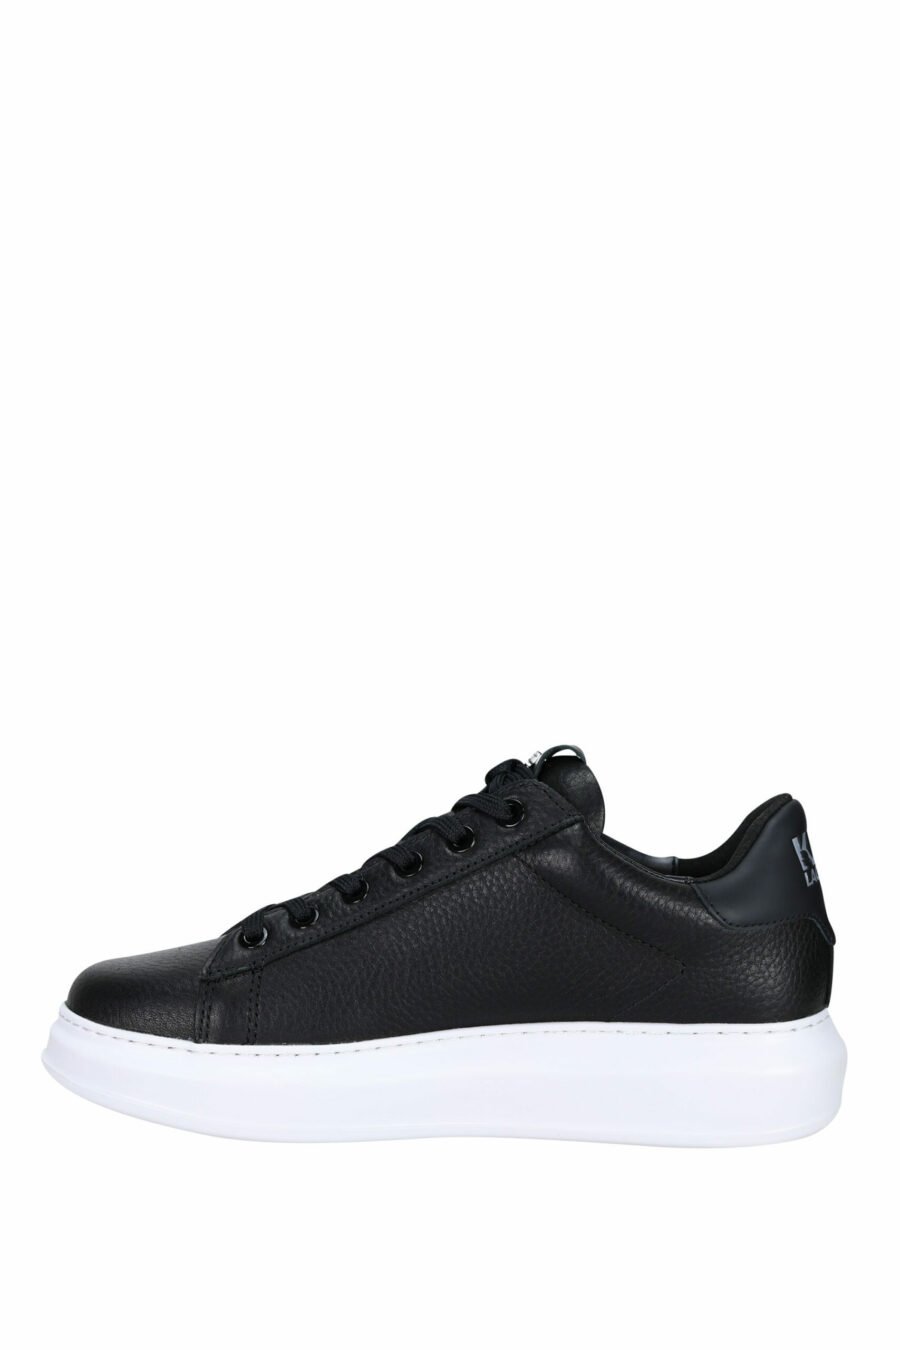 Black "kapri mens" textured trainers with white "rue st guillaume" logo - 5059529323782 2 scaled